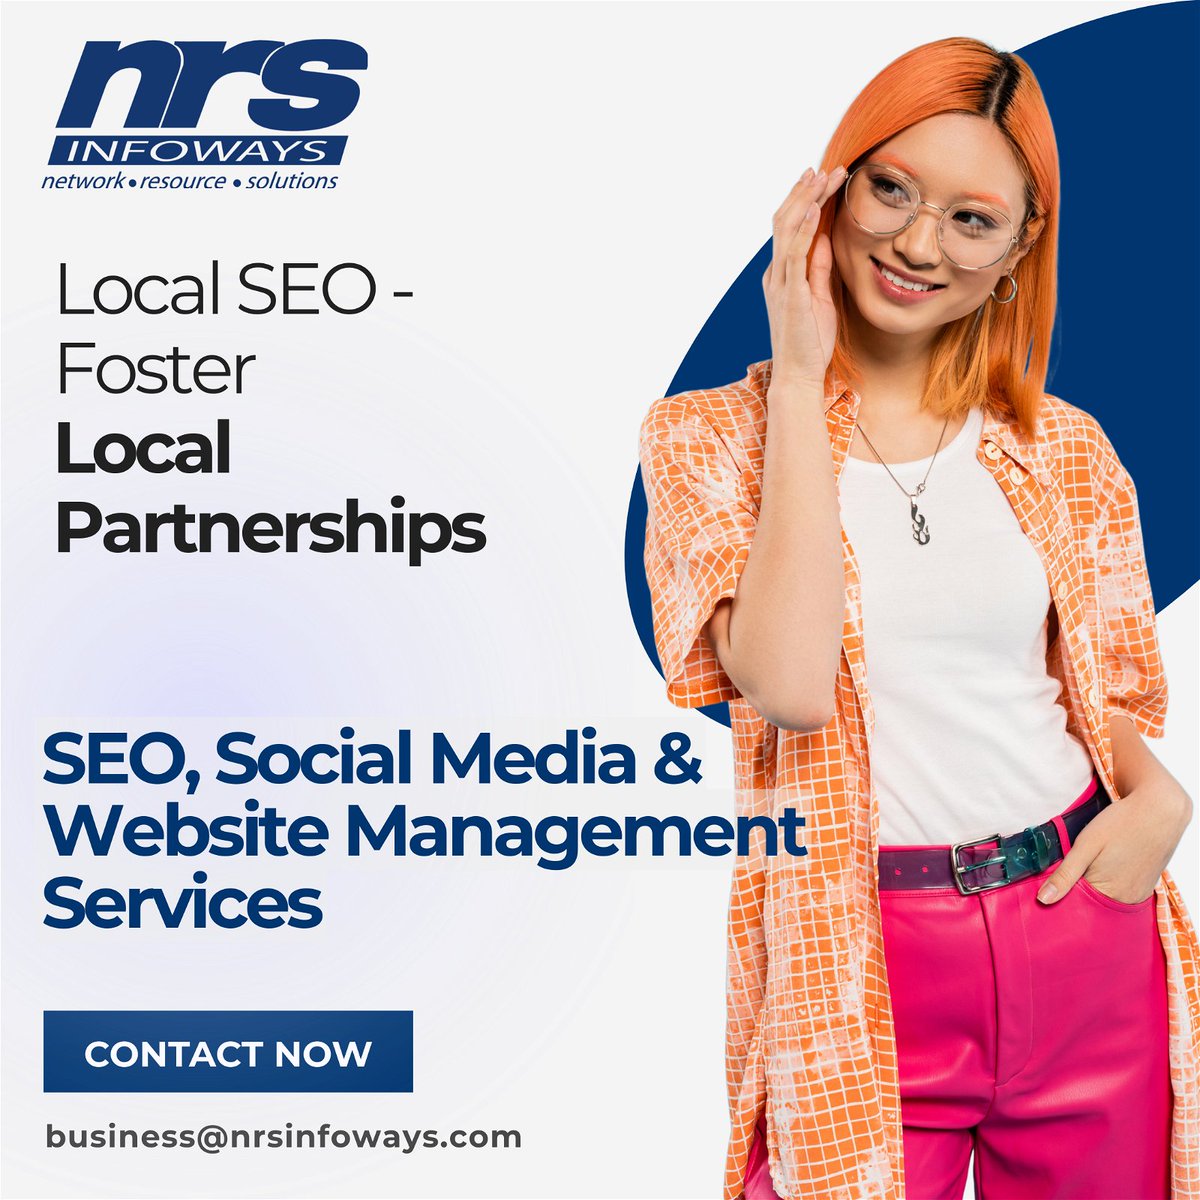 Local SEO - Foster Local Partnerships

Building partnerships with other local businesses and organizations can positively impact your SEO efforts

We can help
Lets discuss business@nrsinfoways.com
#localseo #partnerships #communityengagement #collaboration #backlinks #nrsinfoways